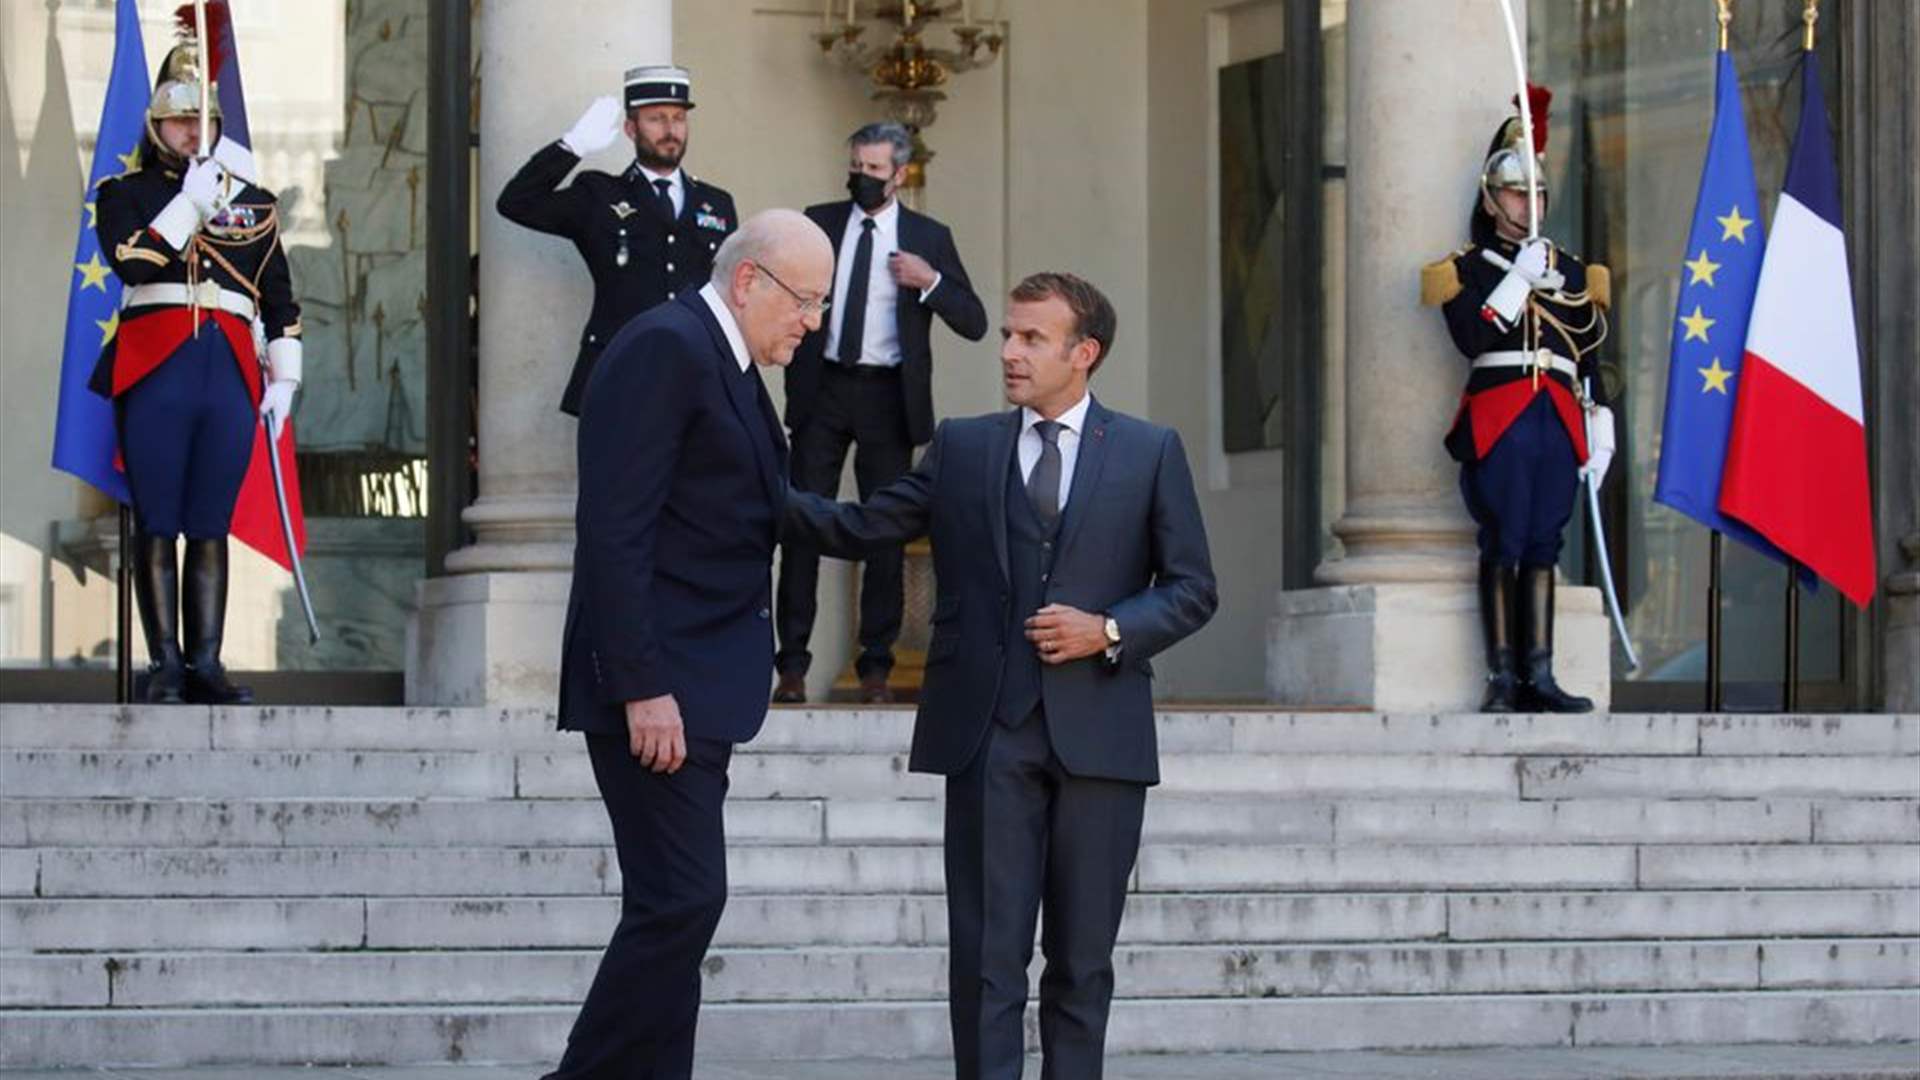 Amid ongoing Lebanese stalemate, France renews sanctions threat 